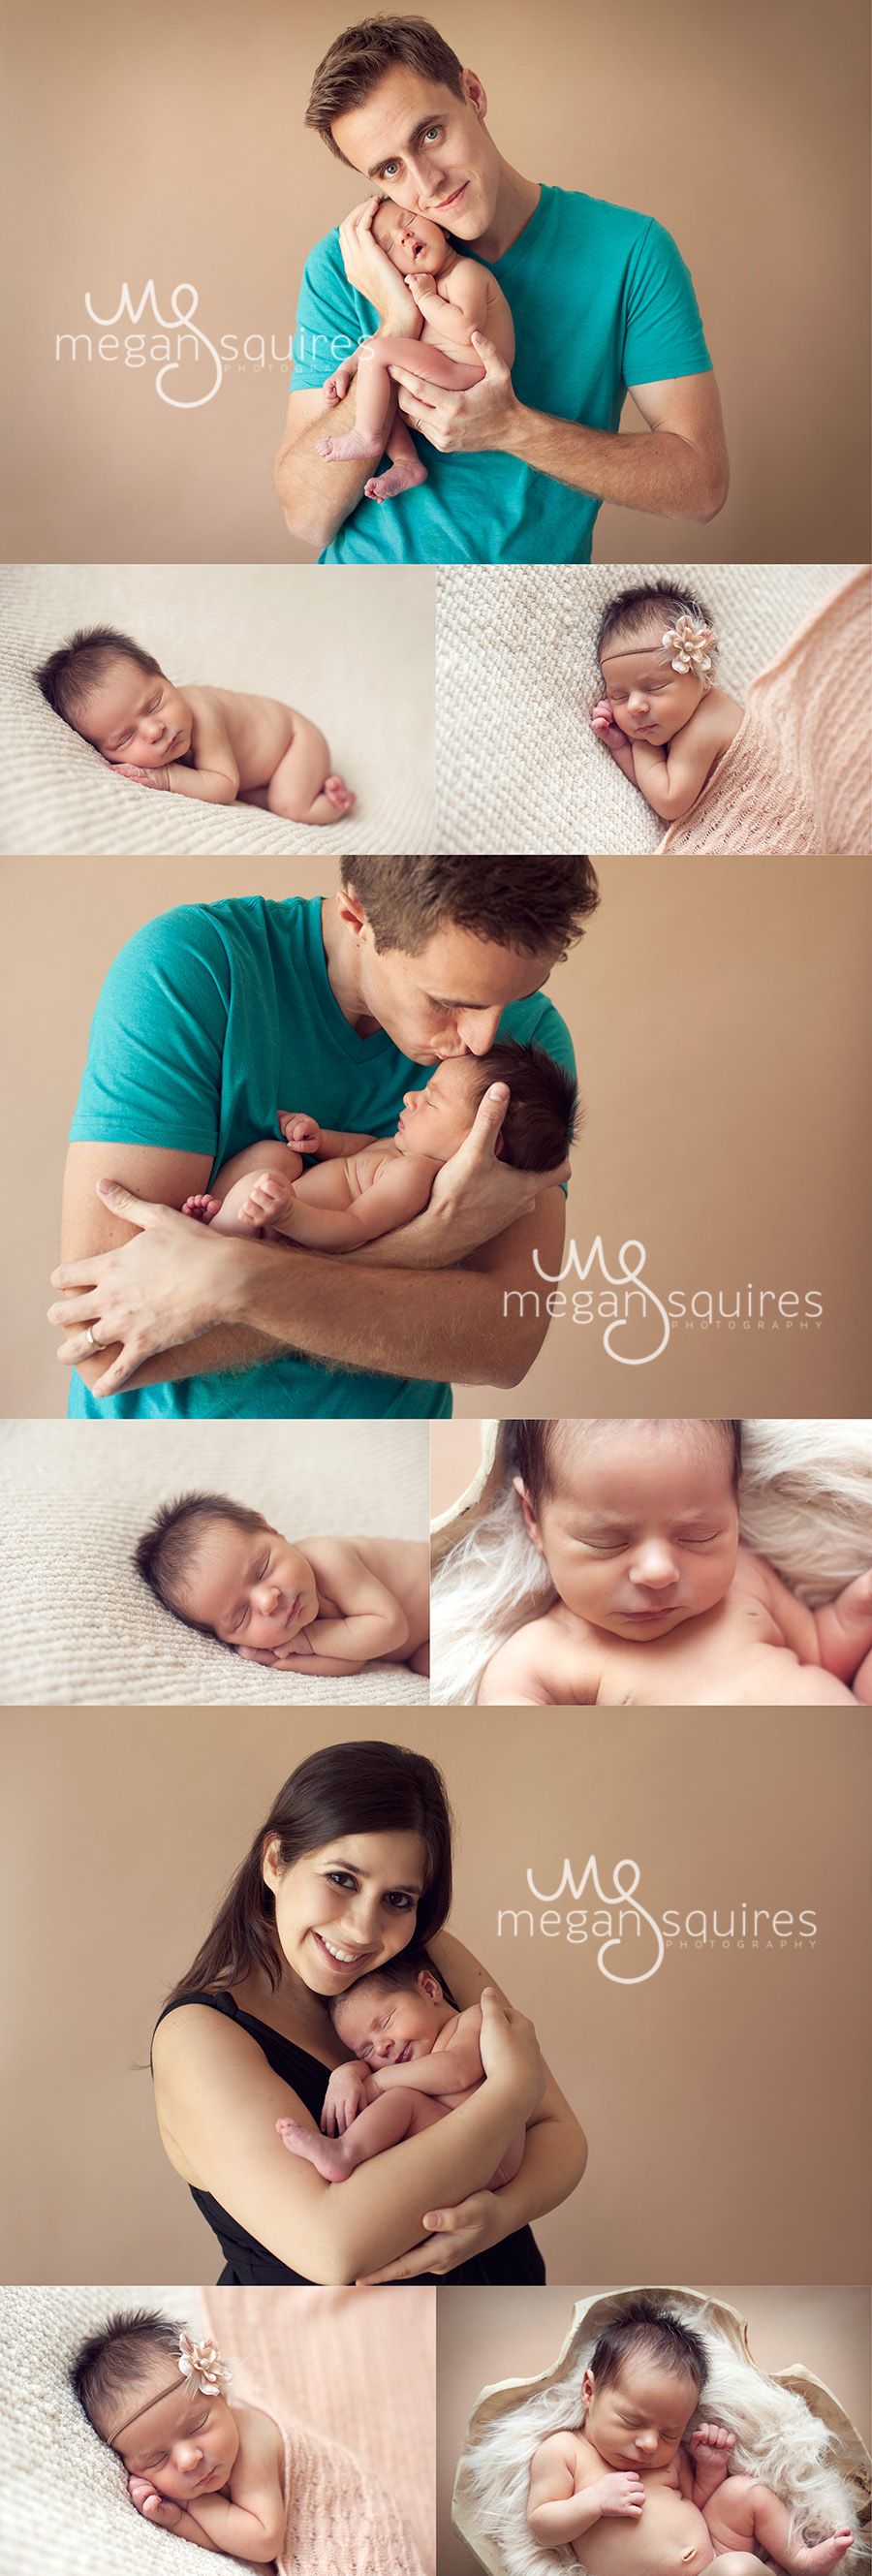 beautiful and simple newborn photography by Megan Squires